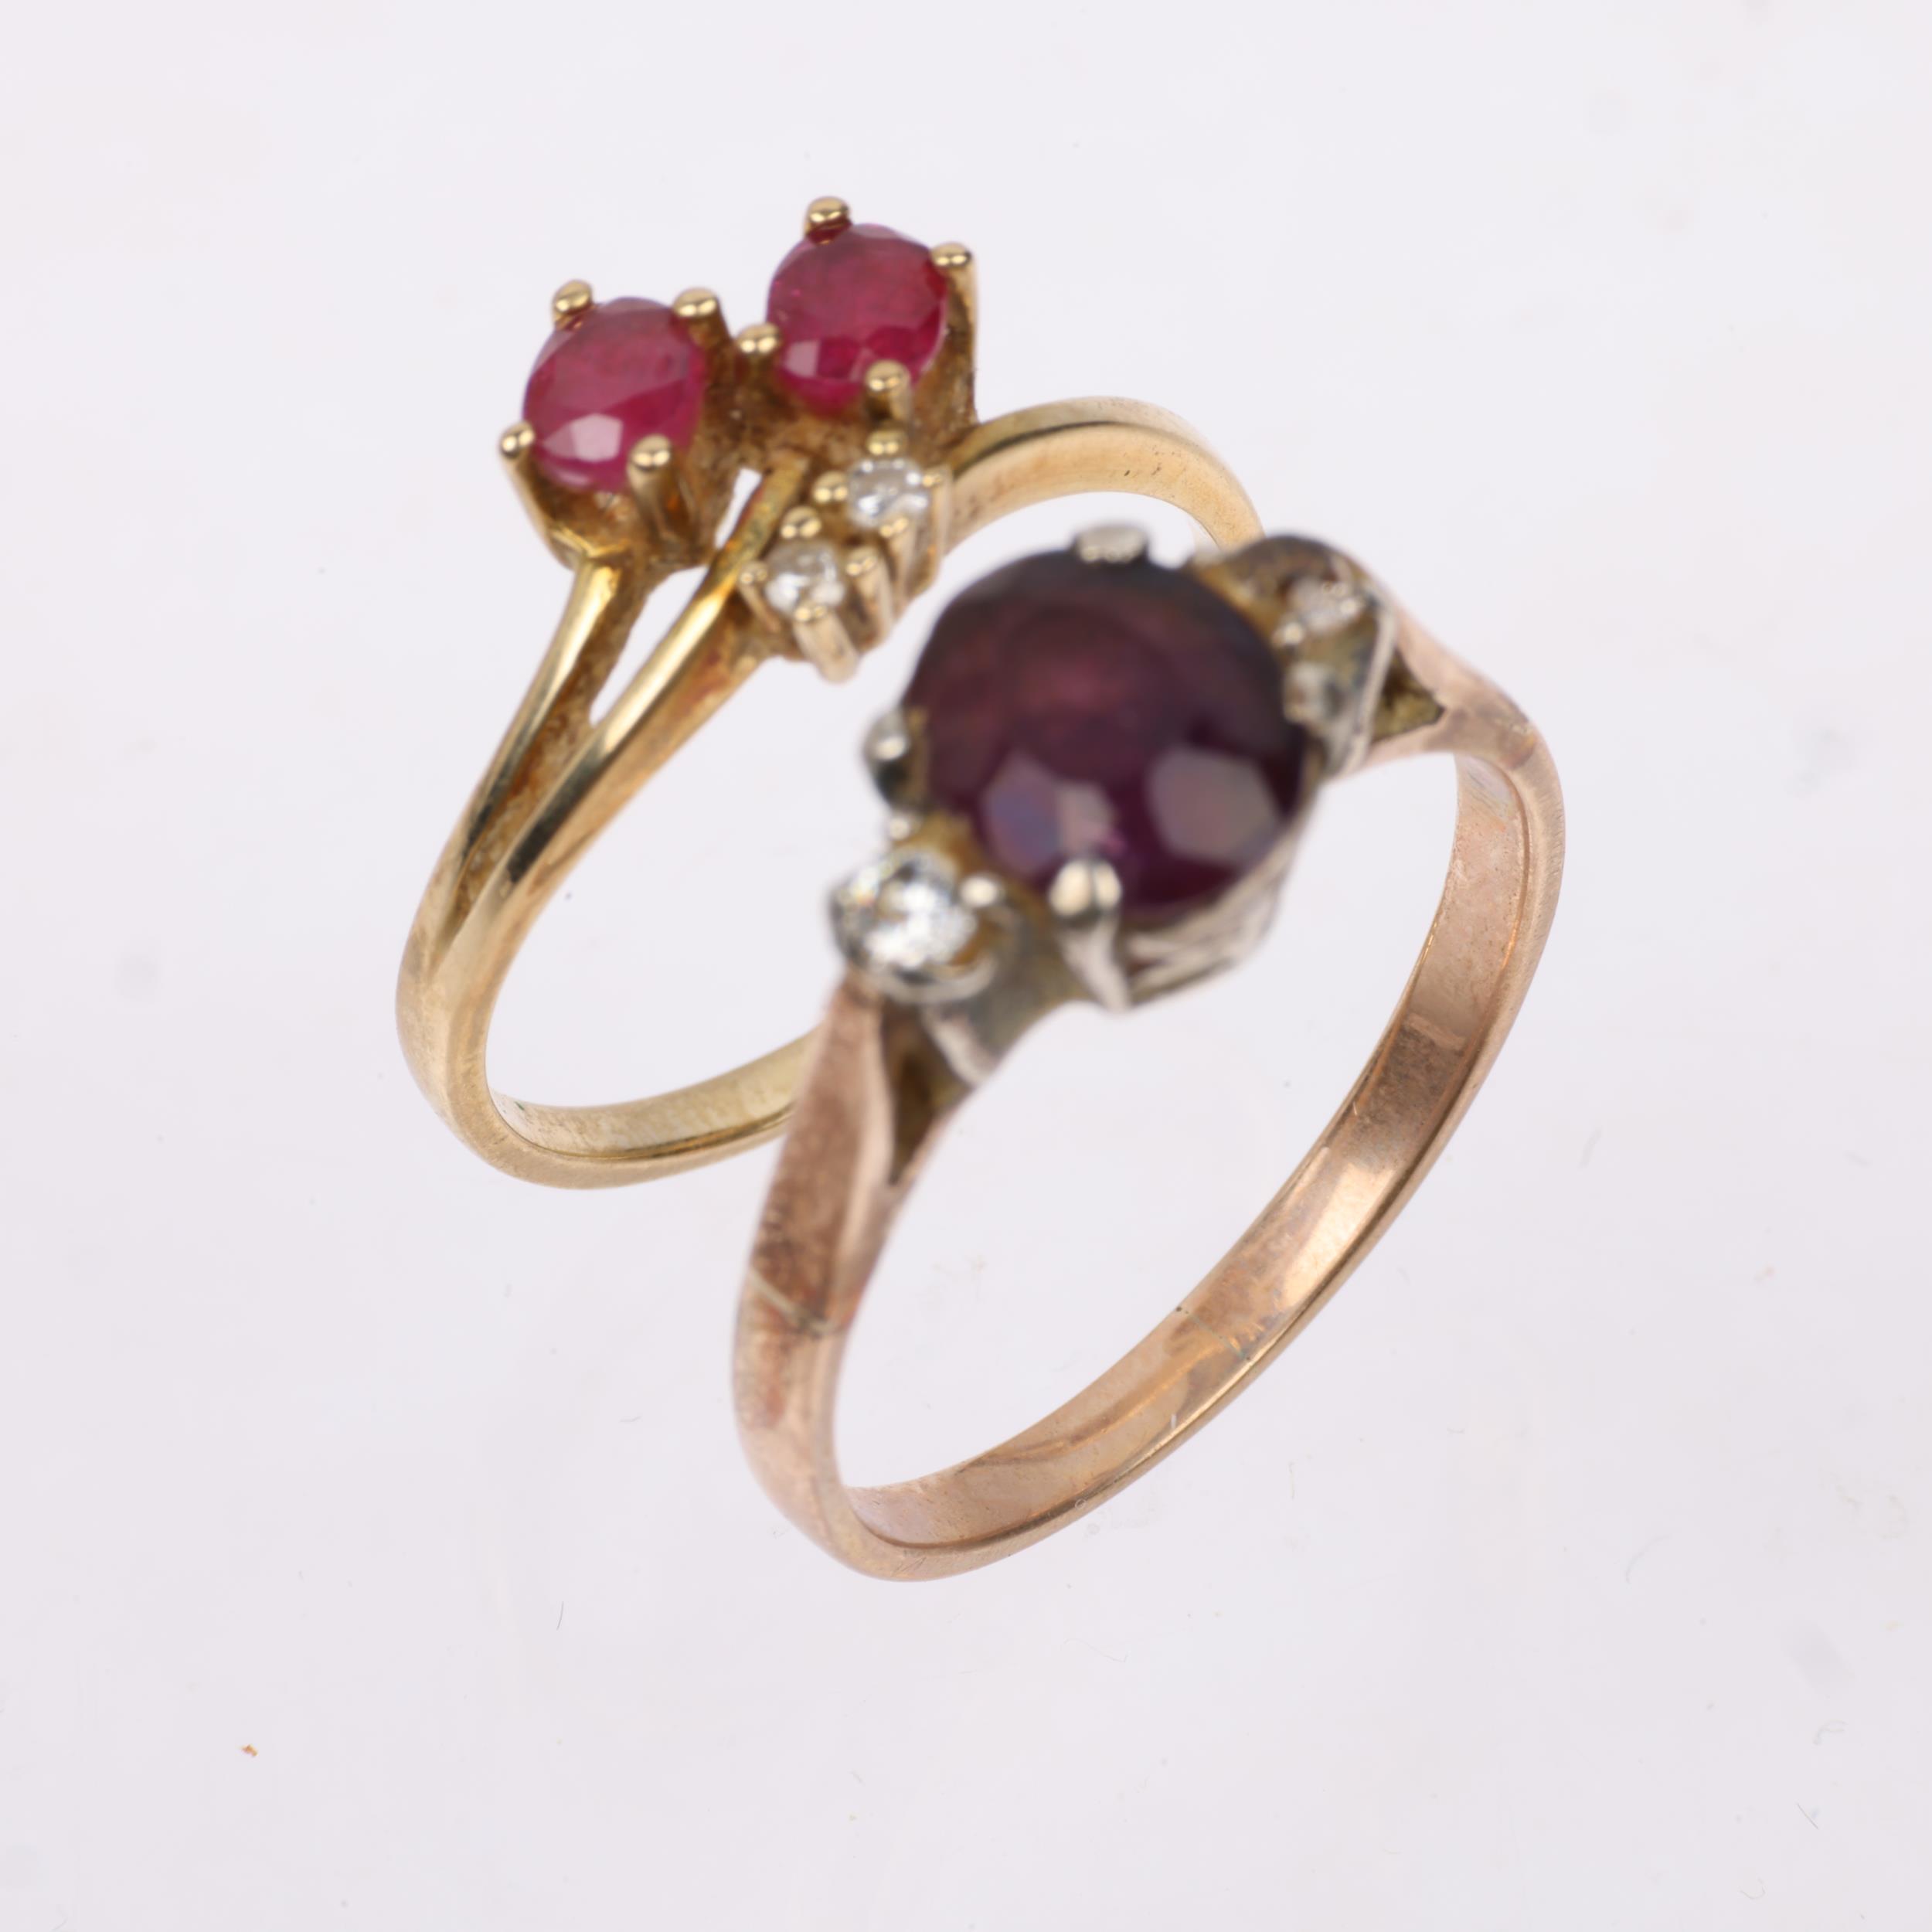 2 x 9ct gold gem set rings, comprising 9ct ruby and diamond crossover, size I, 1.3g, and unmarked - Image 3 of 4